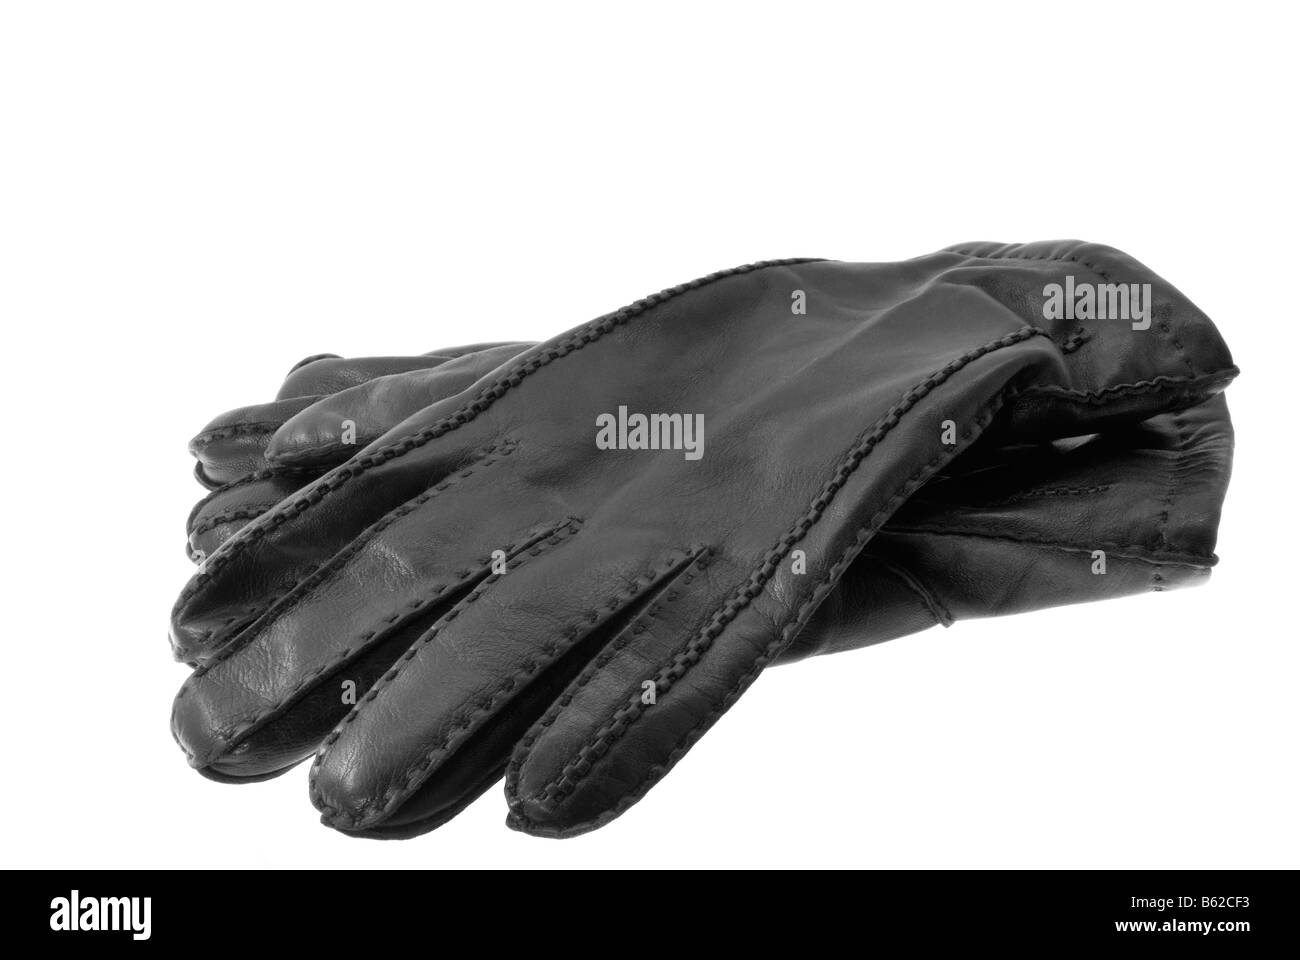 Black leather gloves Black and White Stock Photos & Images - Alamy